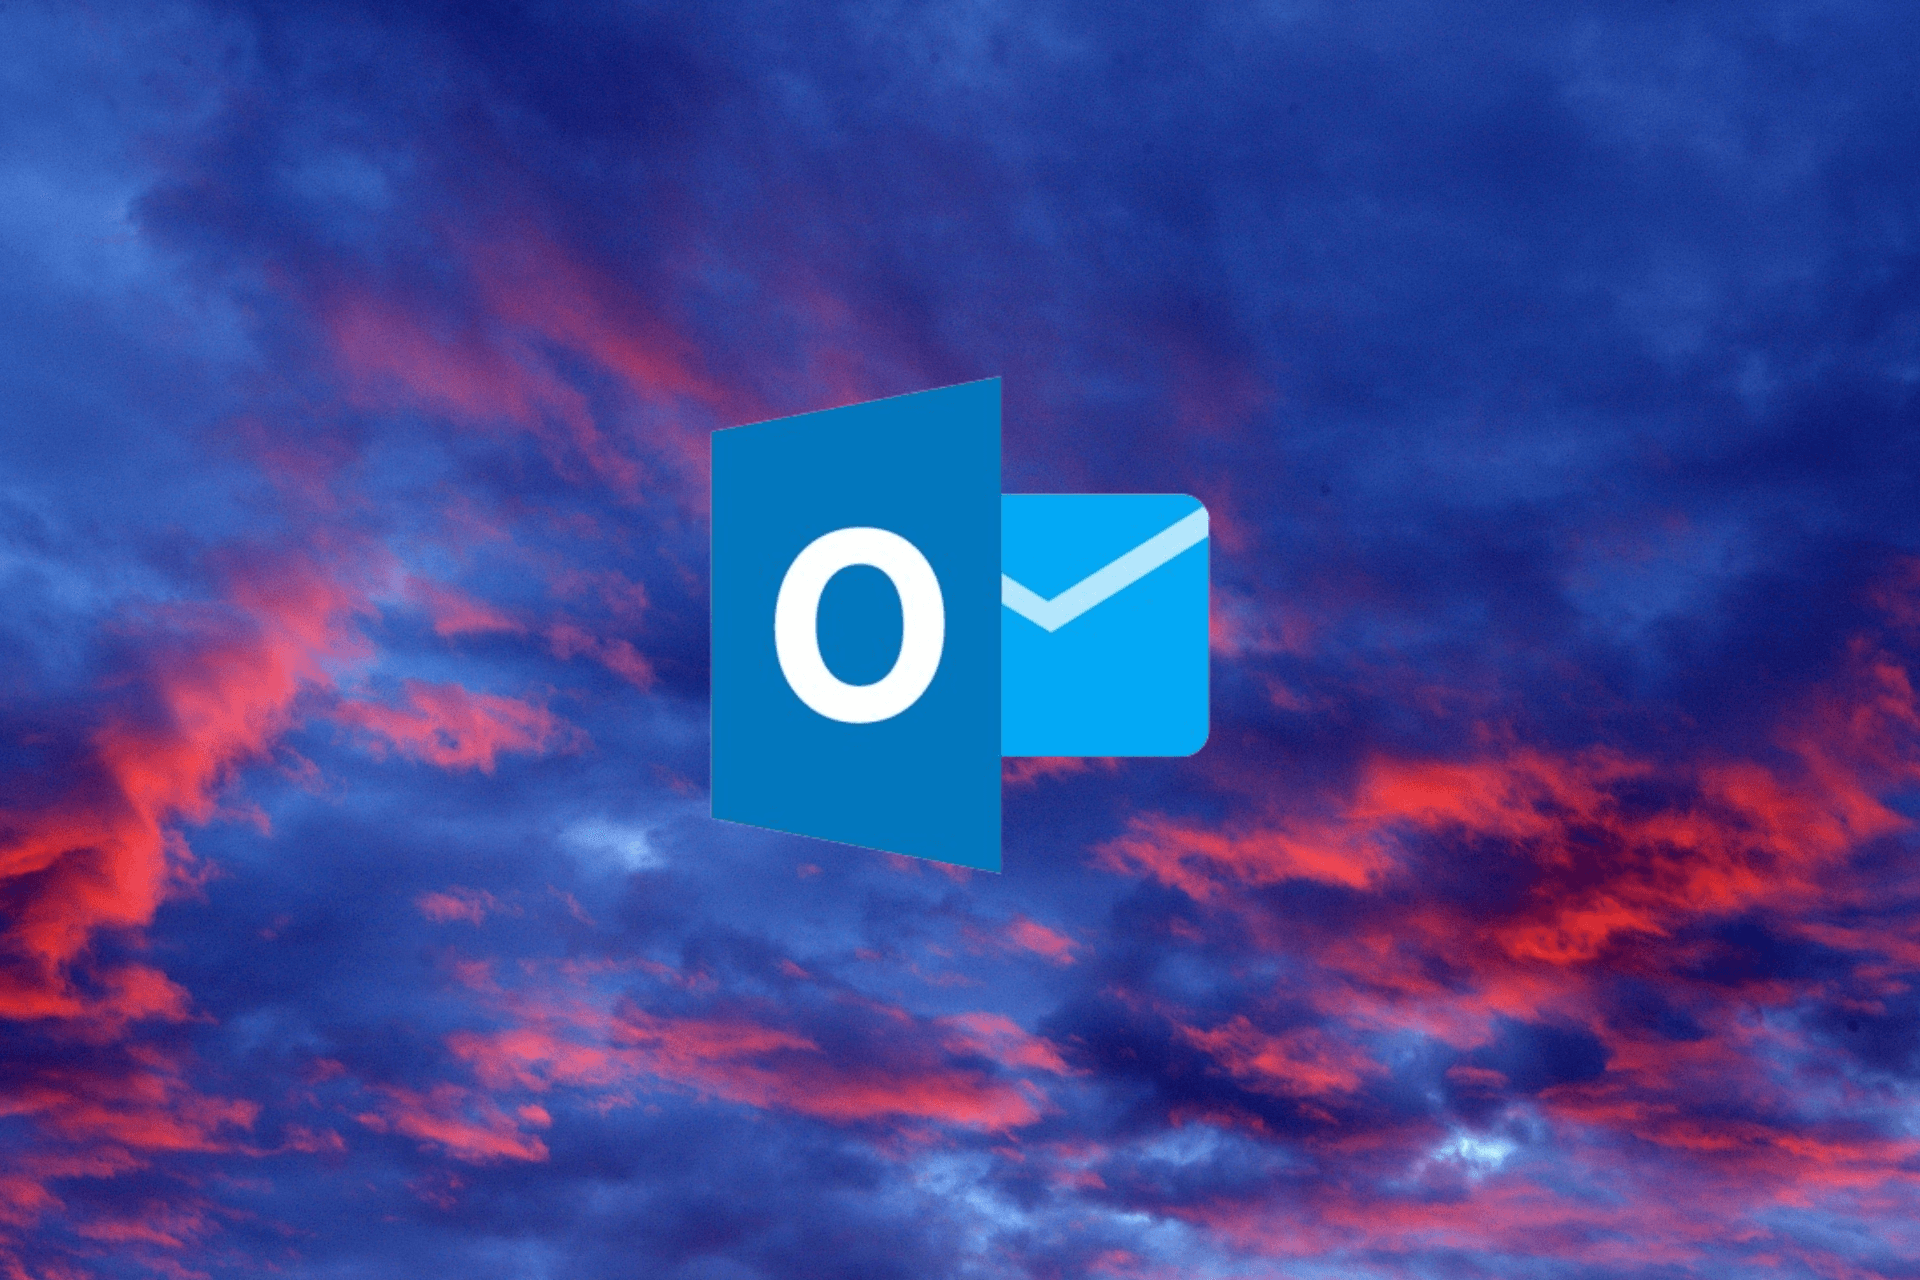 Microsoft comes with a fix for Gmail, blocking Outlook email as spam